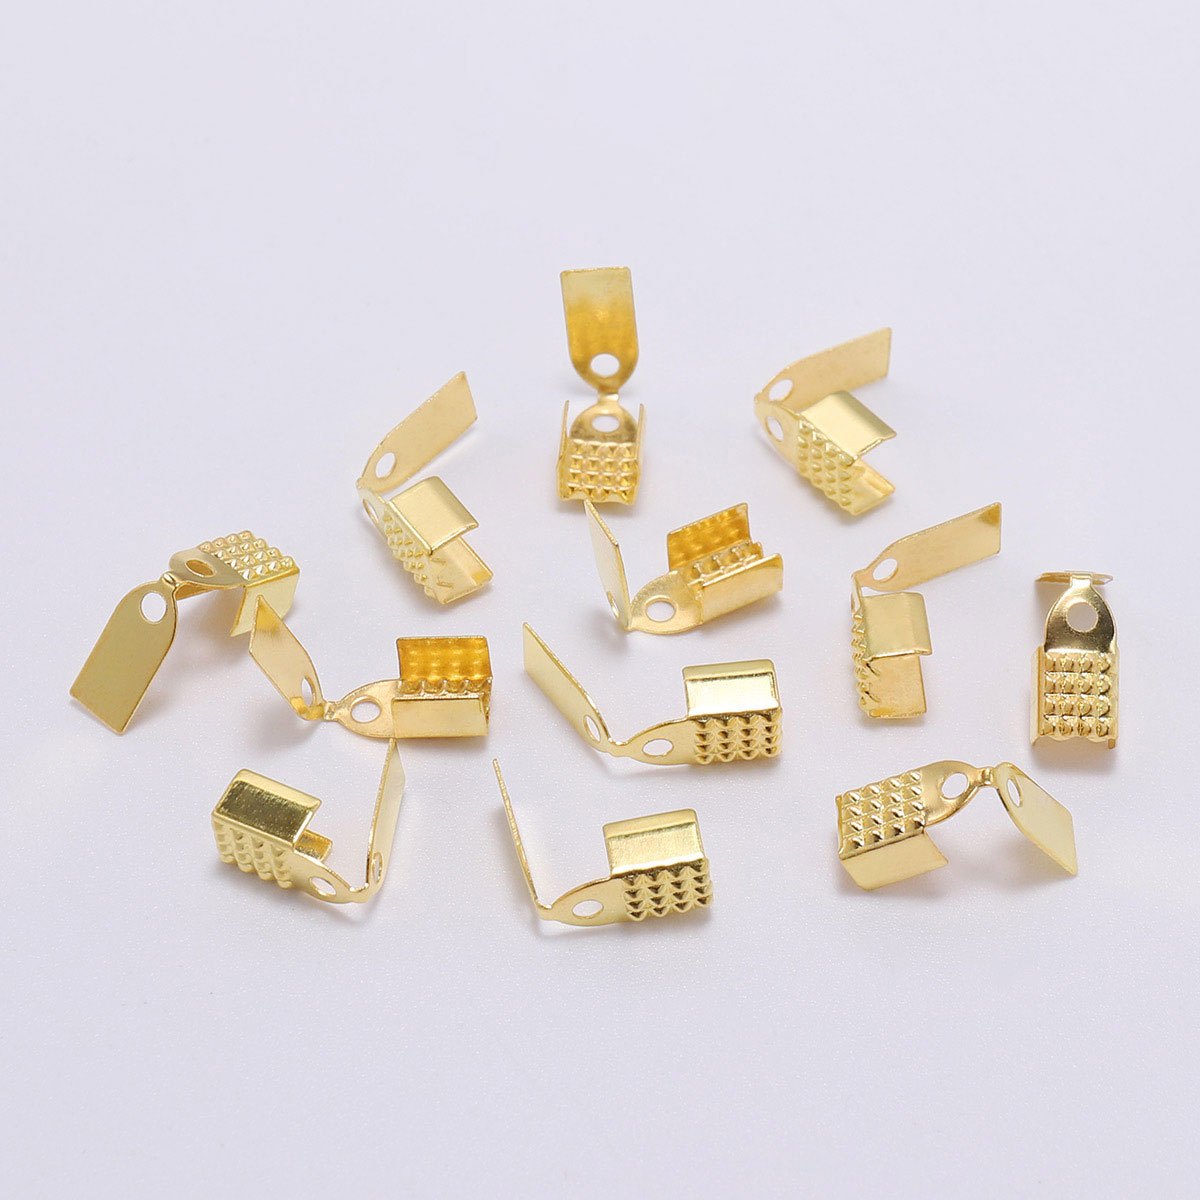 1Set 200PCS 25mm/ 35mm Long 5 Color Iron Ribbon Ends Bracelet Bookmark  Pinch Crimp Clamp End Findings Clasp Leather Cord Ends Jewelry Making  Findings